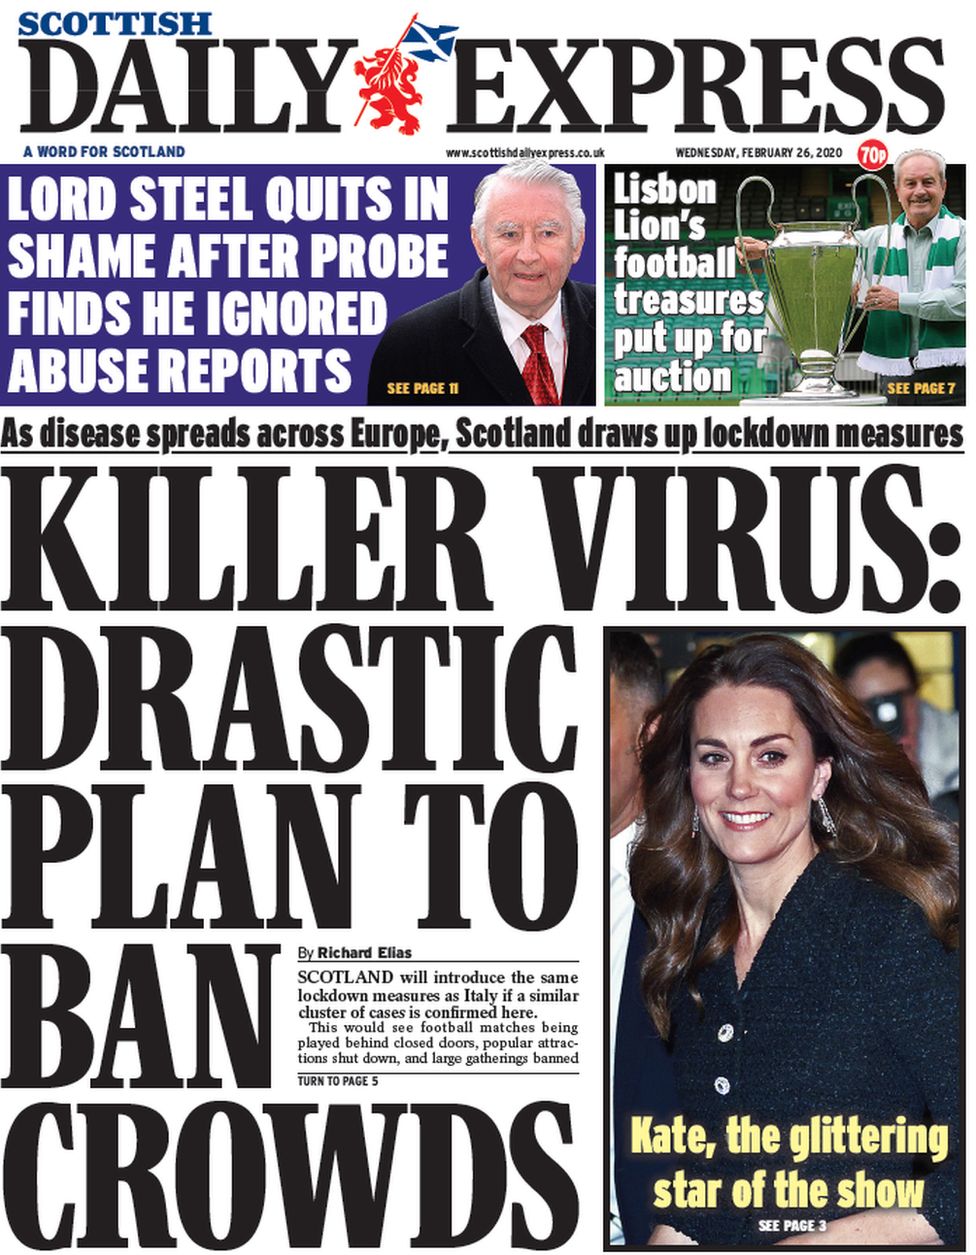 Express front page